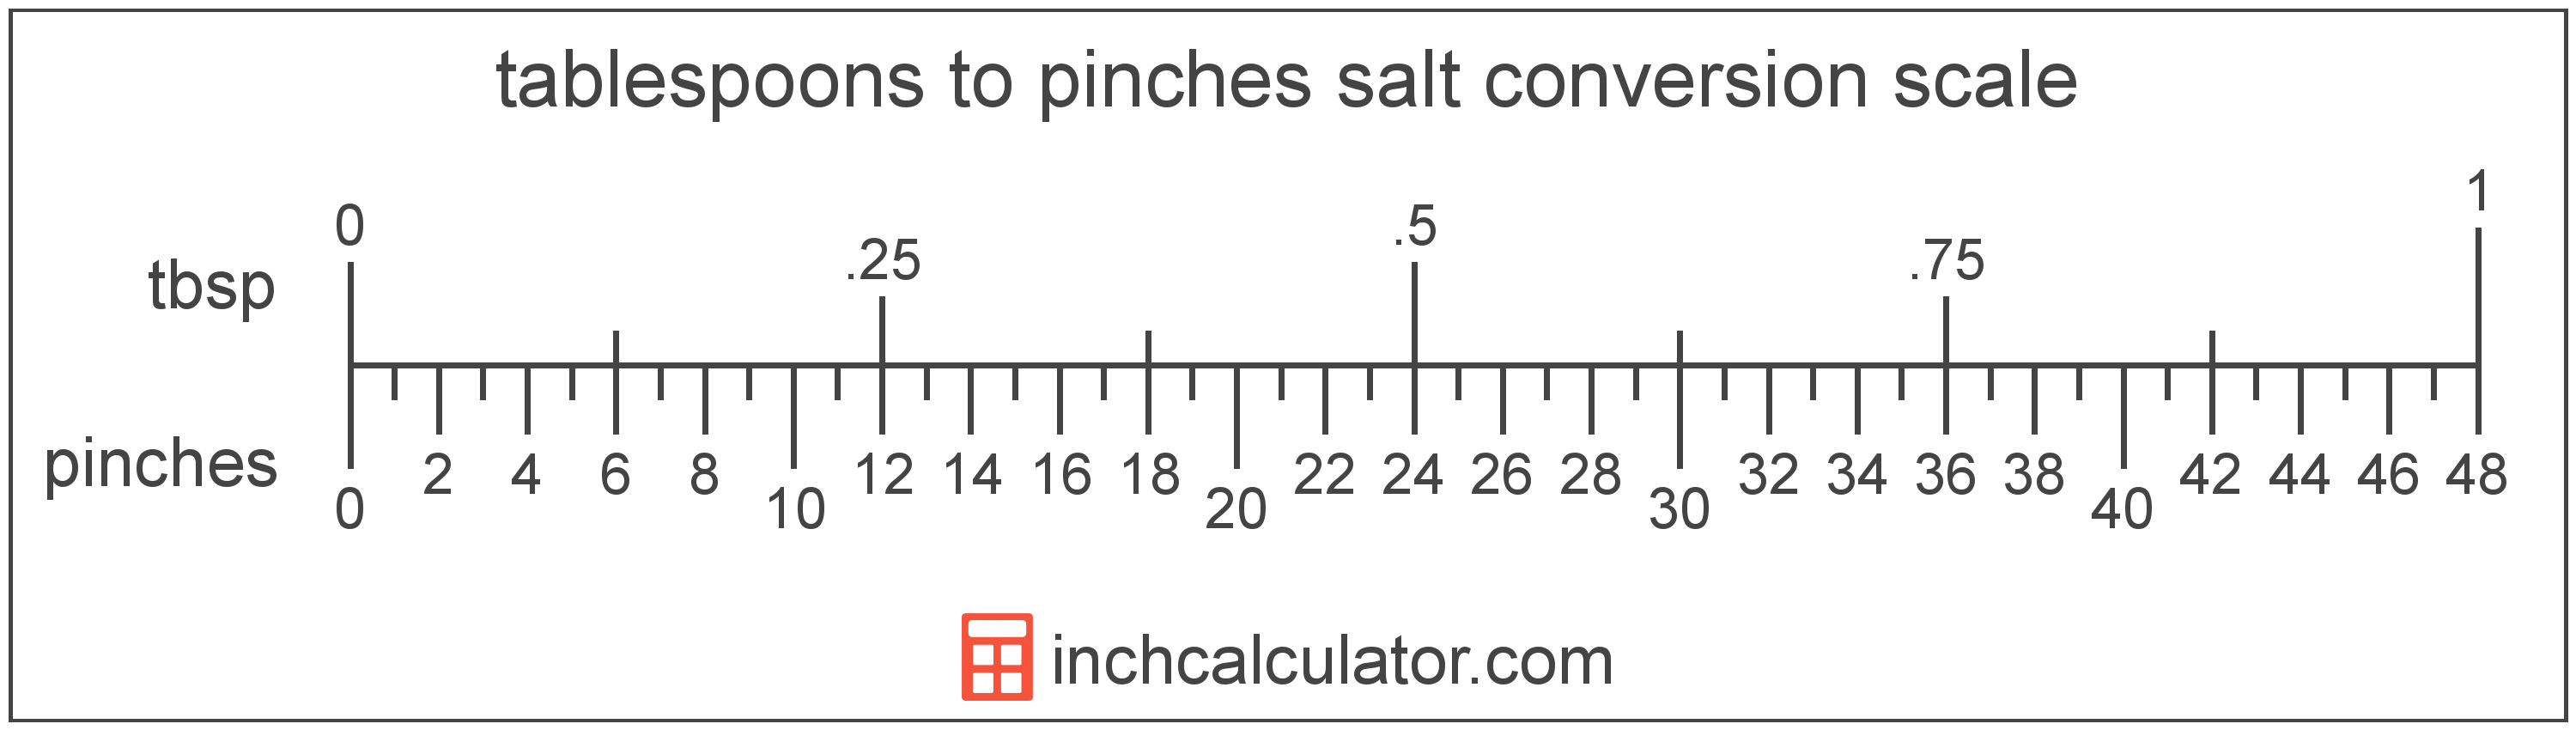 conversion scale showing tablespoons and equivalent pinches salt volume values